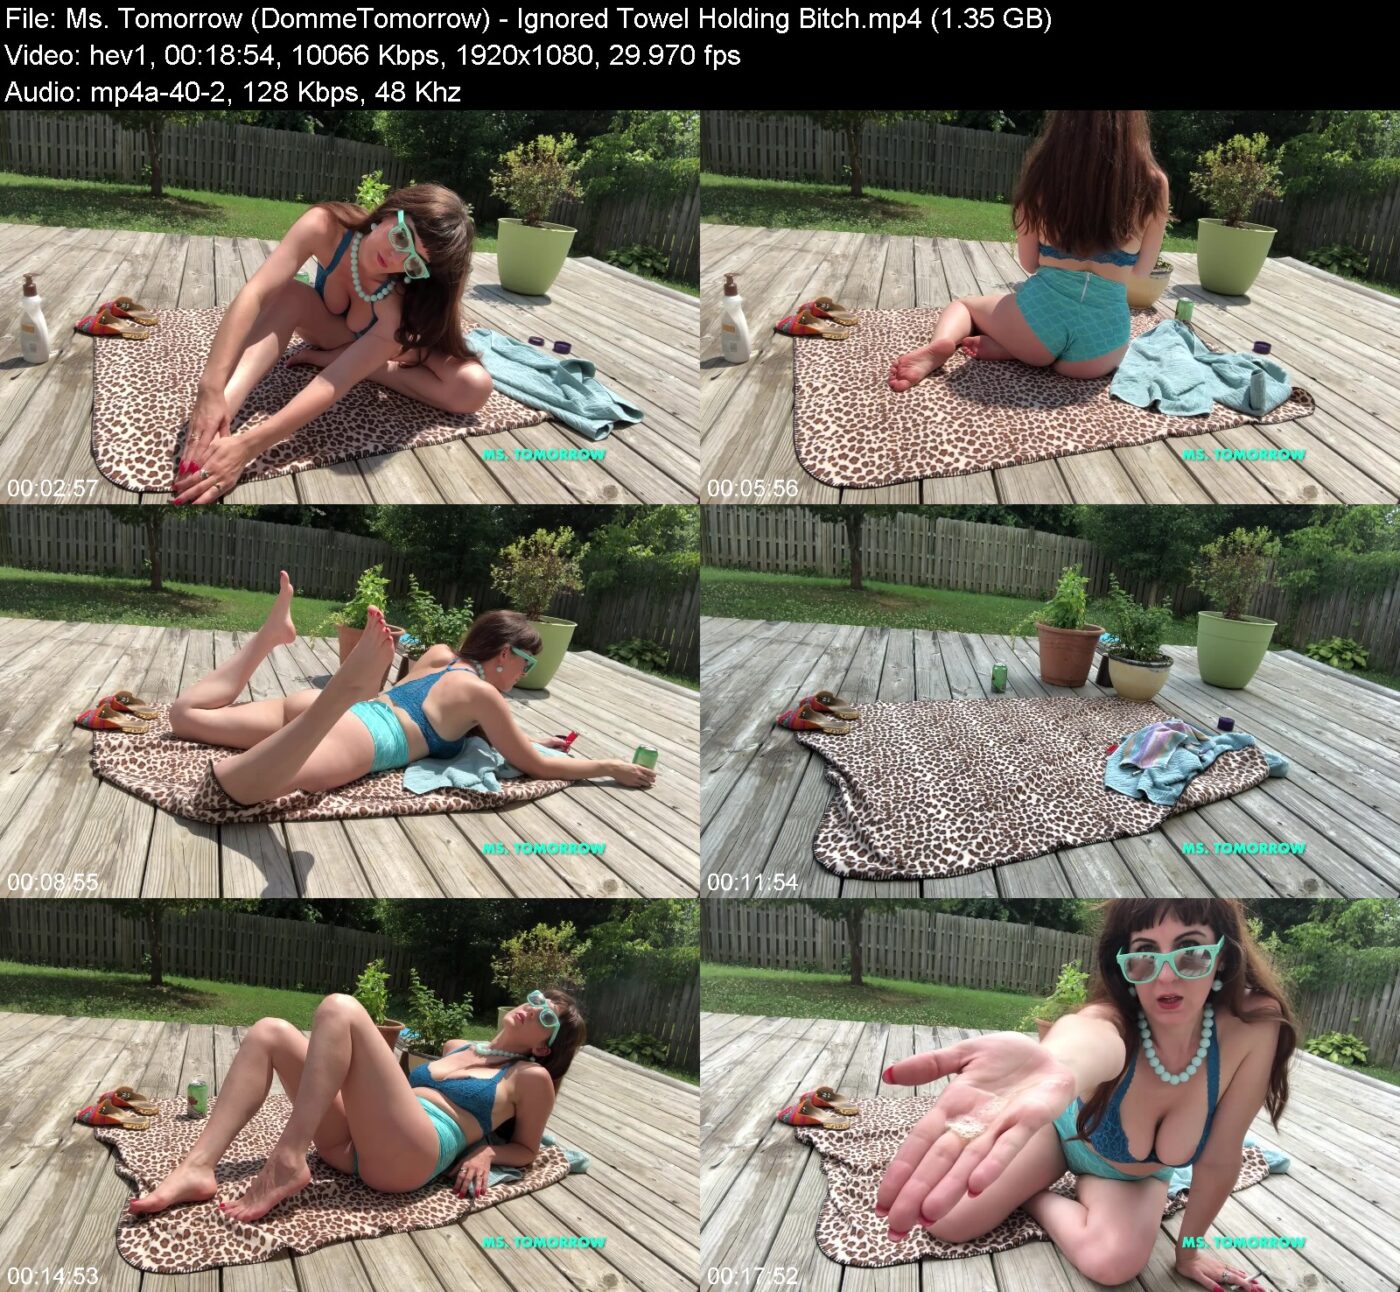 Ms. Tomorrow (DommeTomorrow) in Ignored Towel Holding Bitch